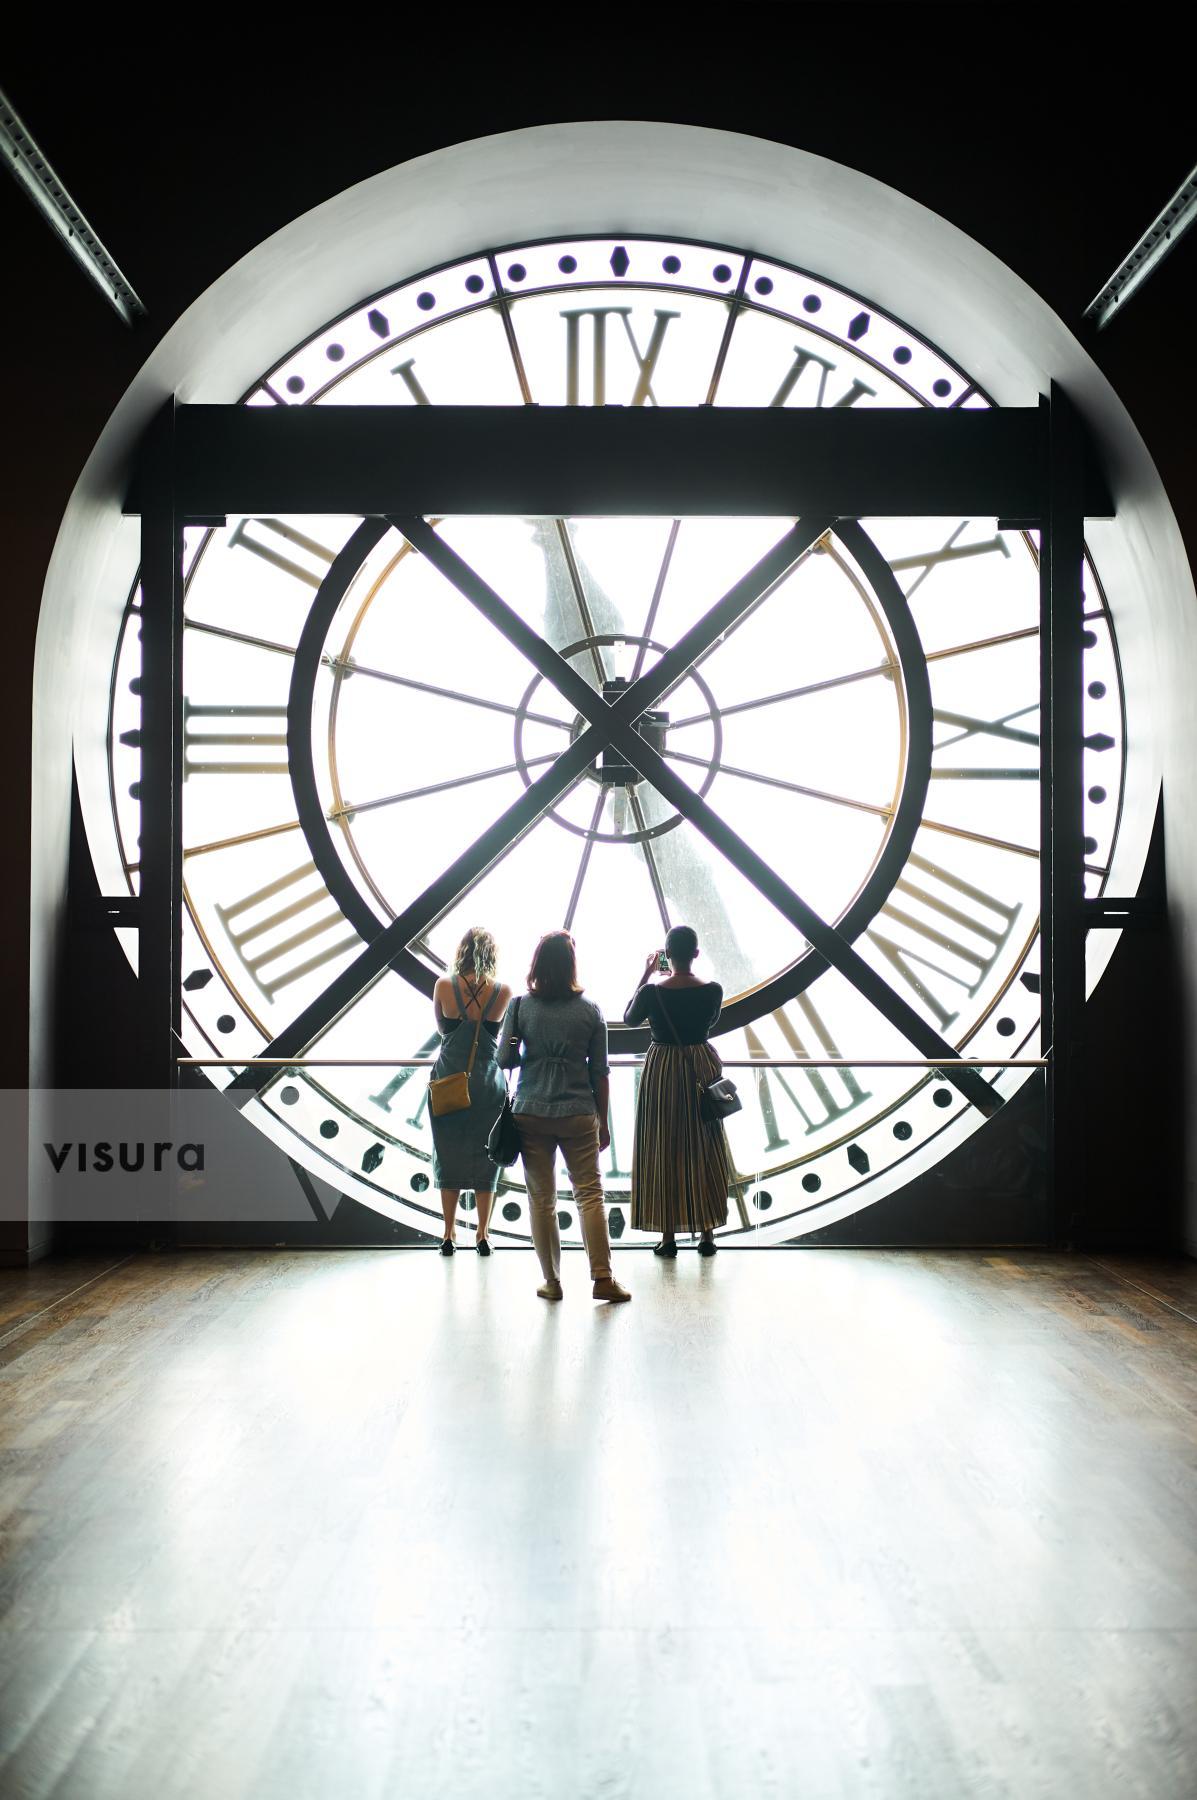 Purchase Behind the clock of the Musée d'Orsay, Paris France by Remon Haazen